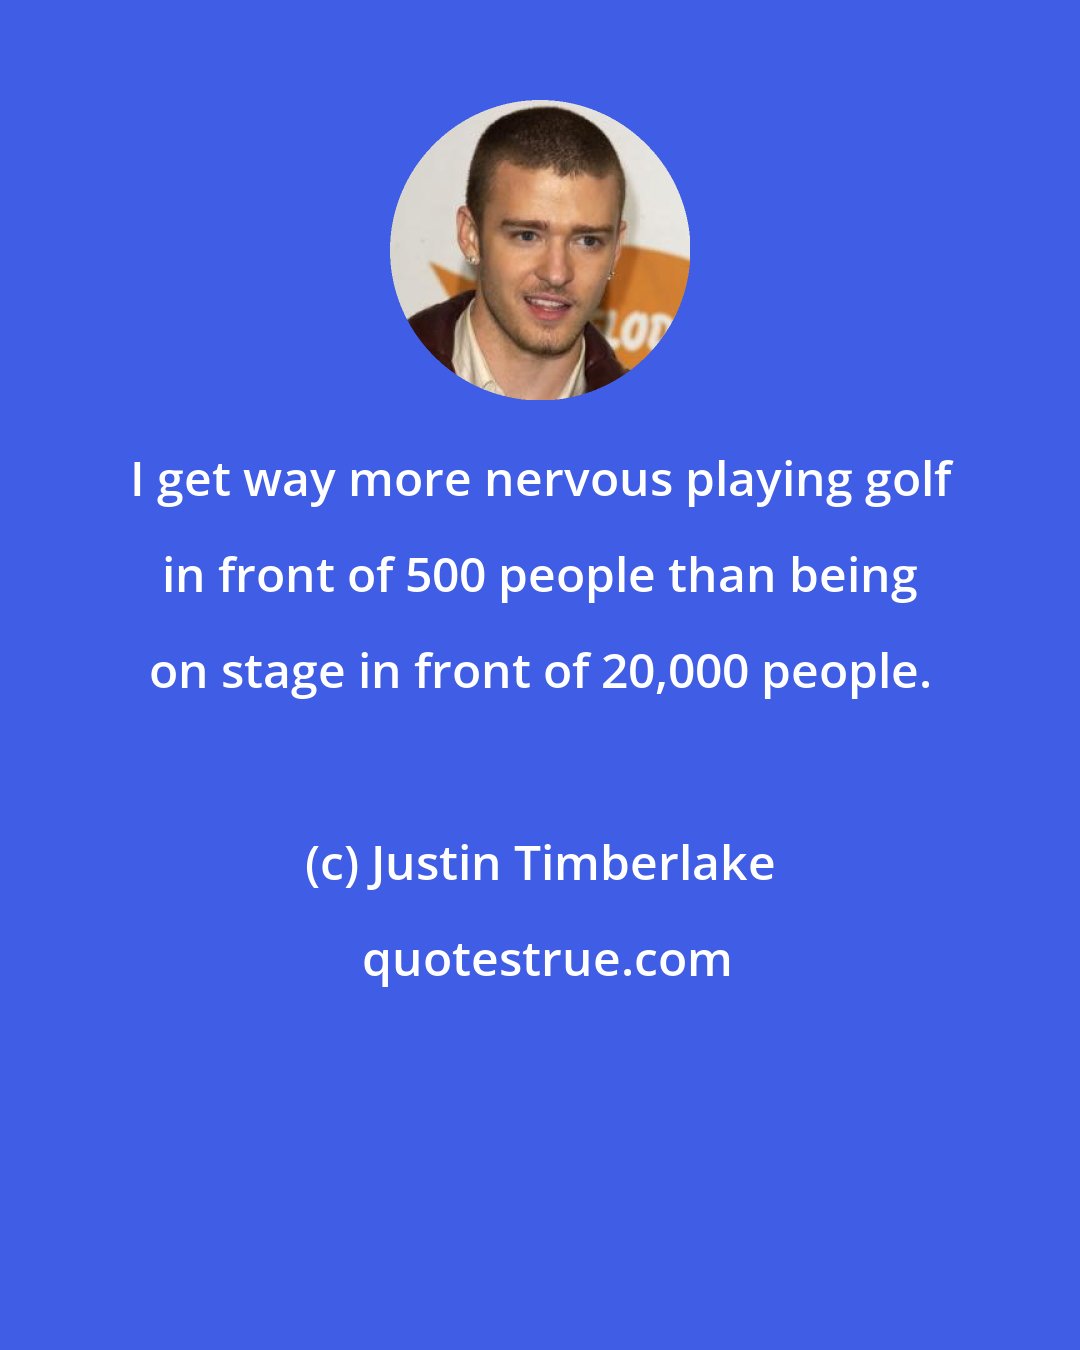 Justin Timberlake: I get way more nervous playing golf in front of 500 people than being on stage in front of 20,000 people.